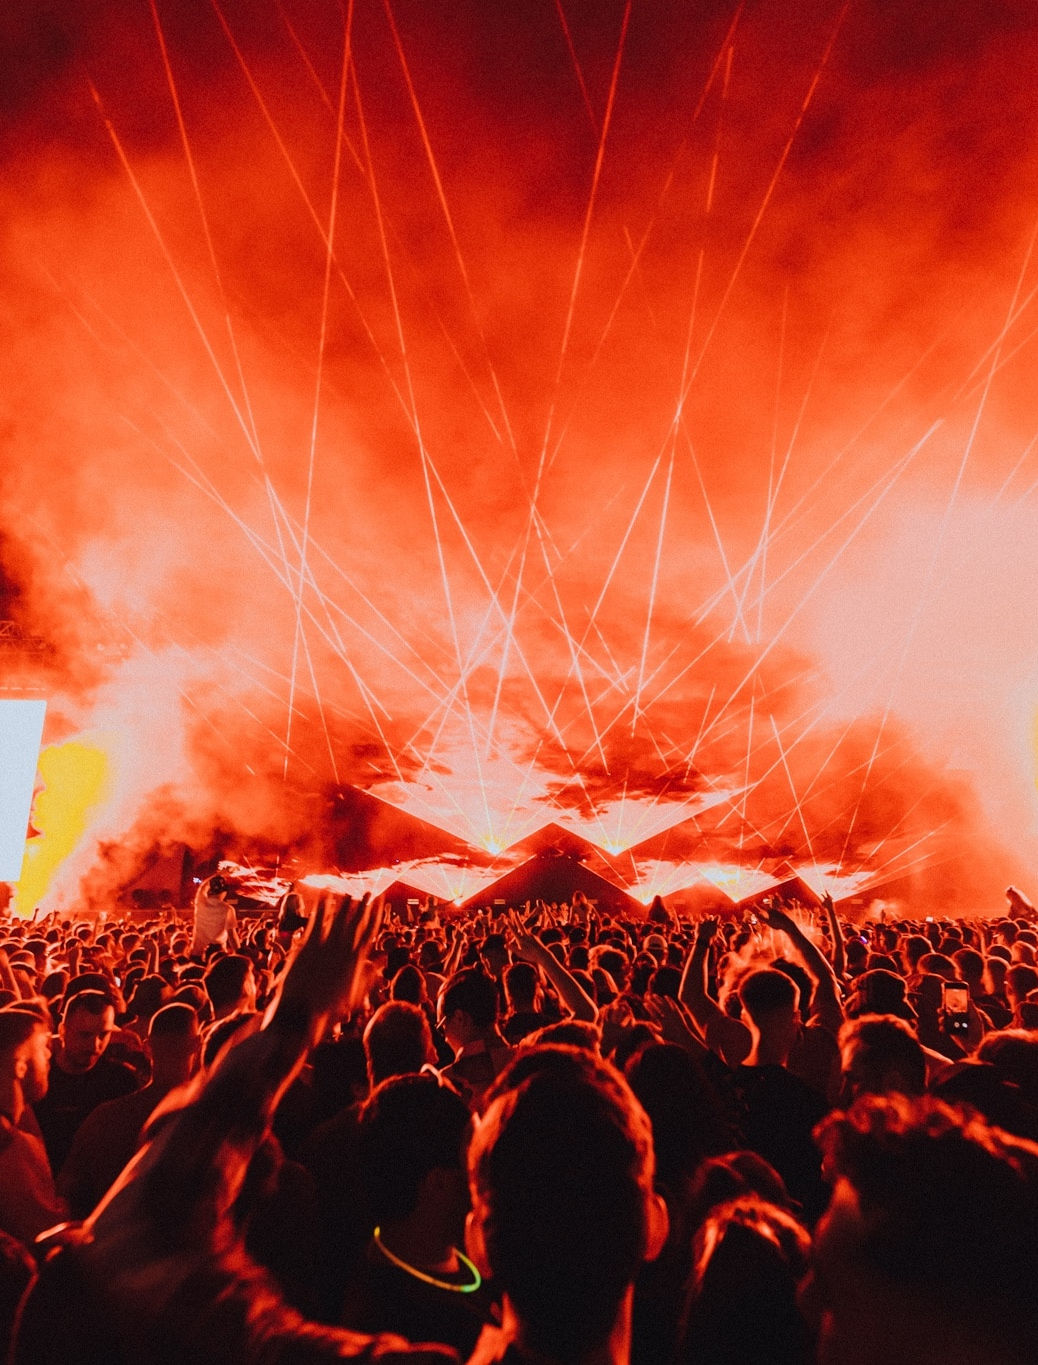 IRELAND'S BIGGEST ELECTRONIC MUSIC FESTIVAL 'EMERGE' SET TO RETURN TO BELFAST'S BOUCHER ROAD PLAYING FIELDS IN AUGUST 2023 – Love Belfast